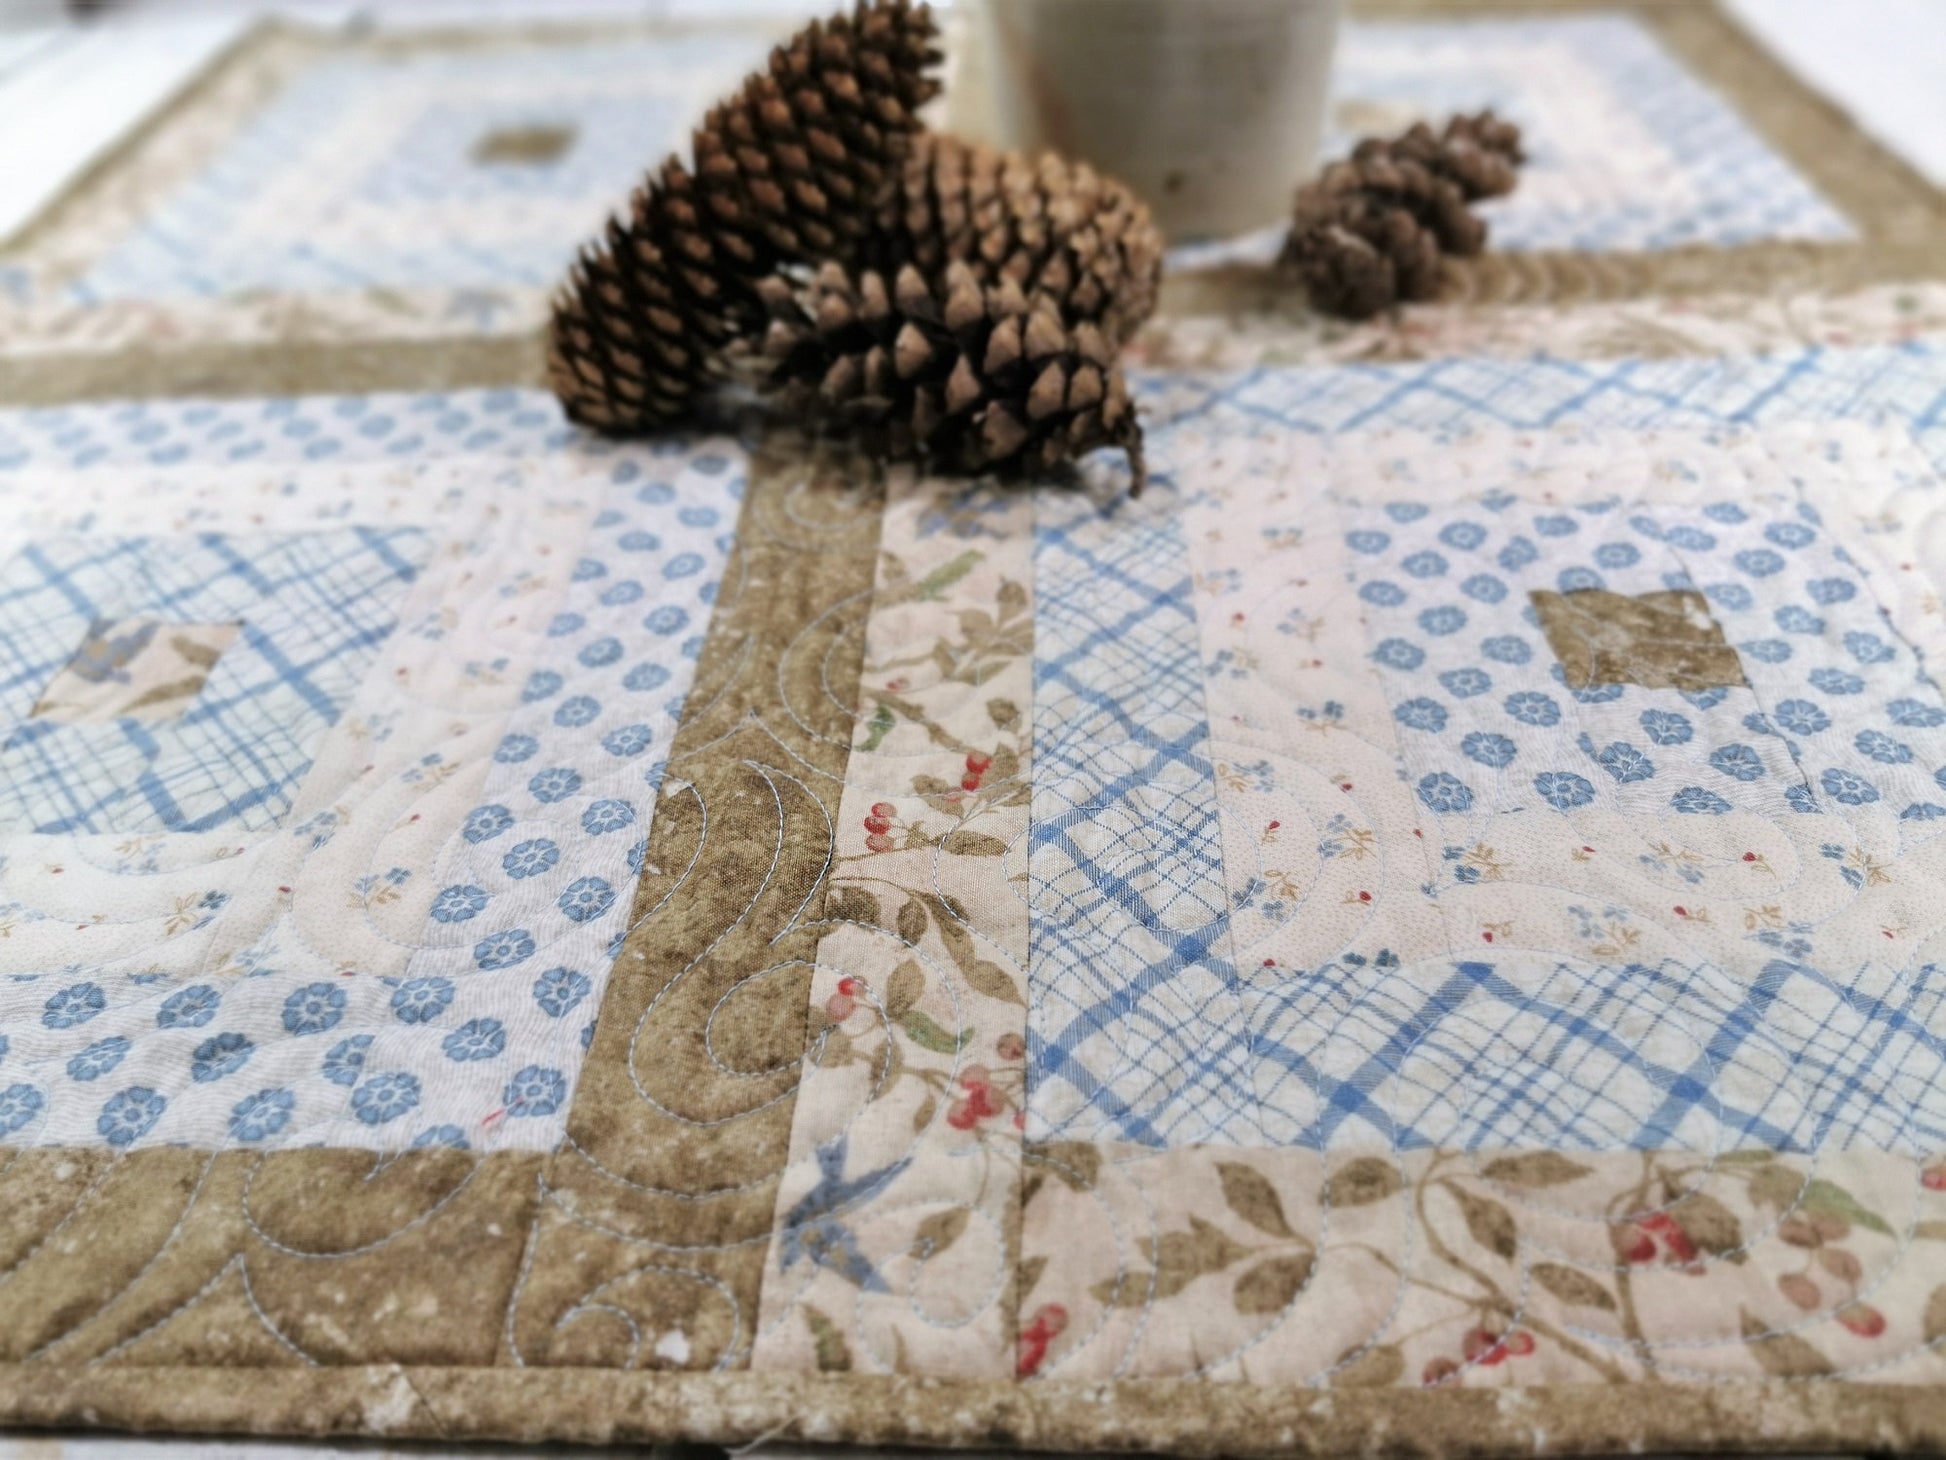 close up of quilt with pinecones in the background showing scale